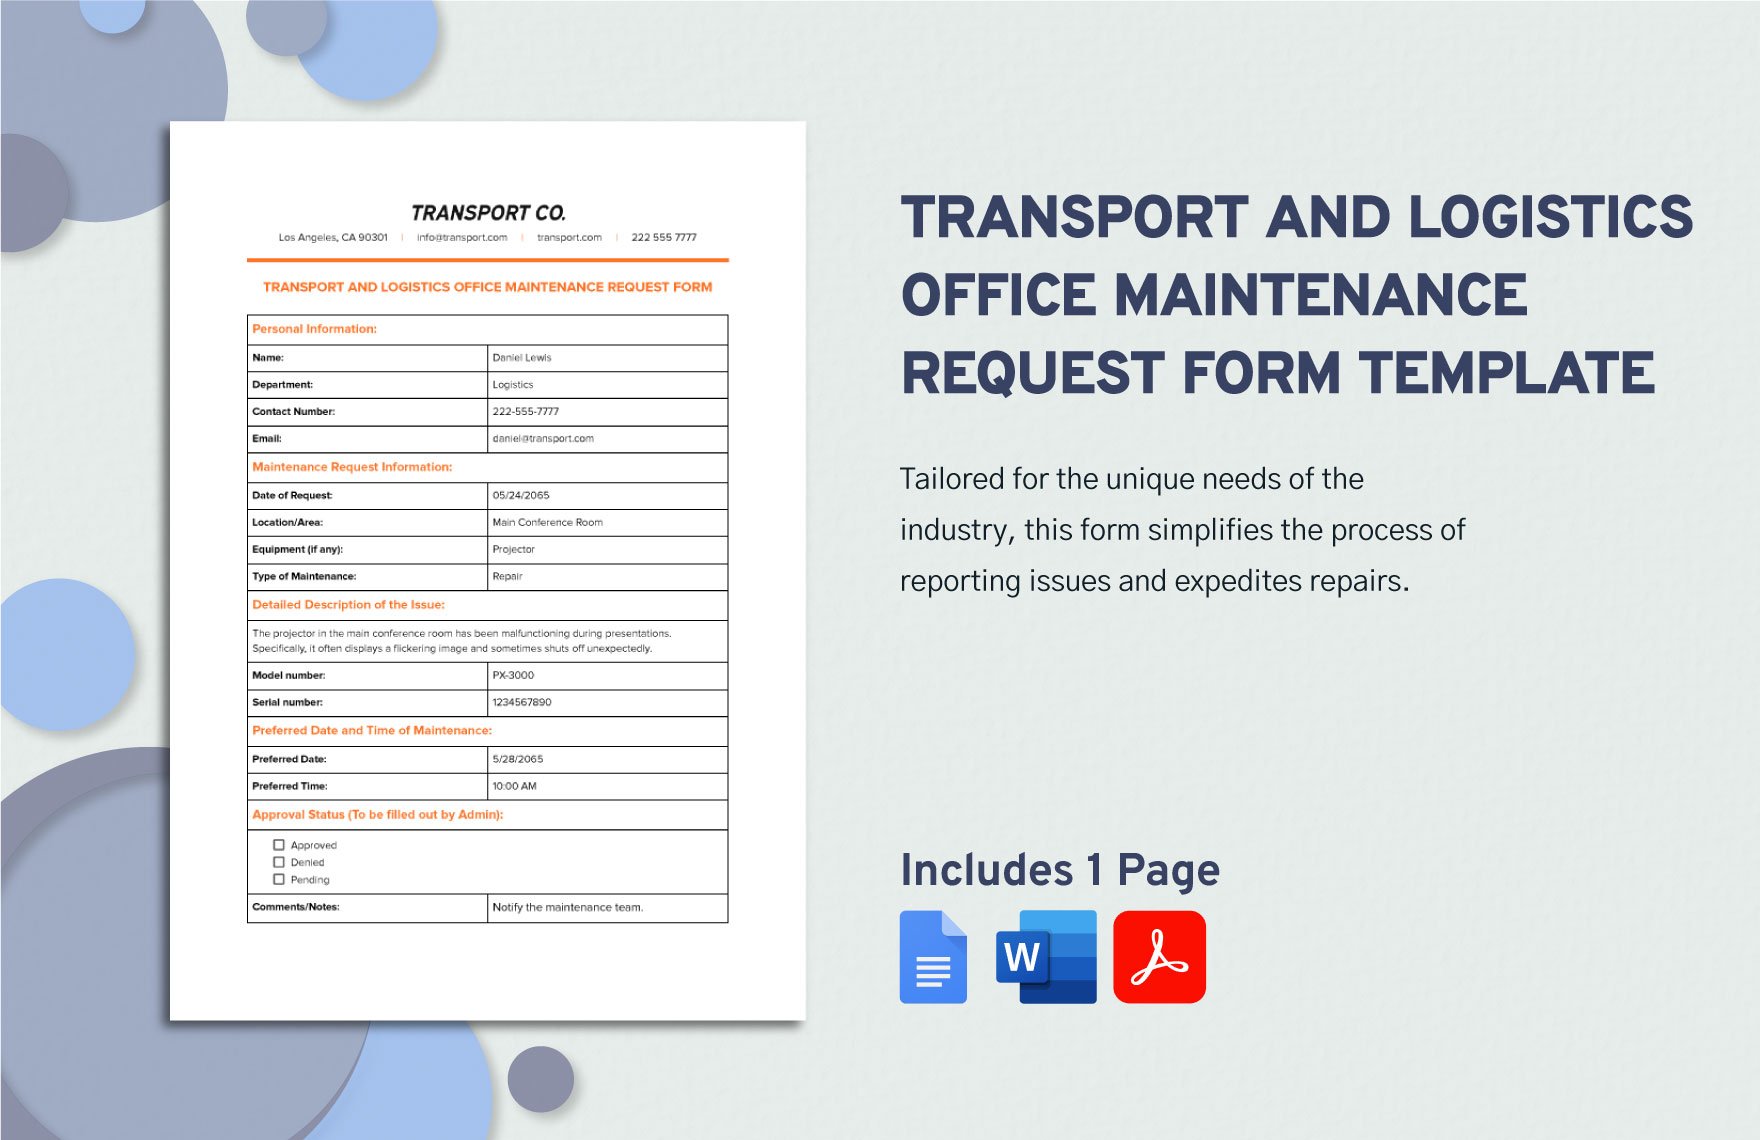 Transport and Logistics Office Maintenance Request Form Template